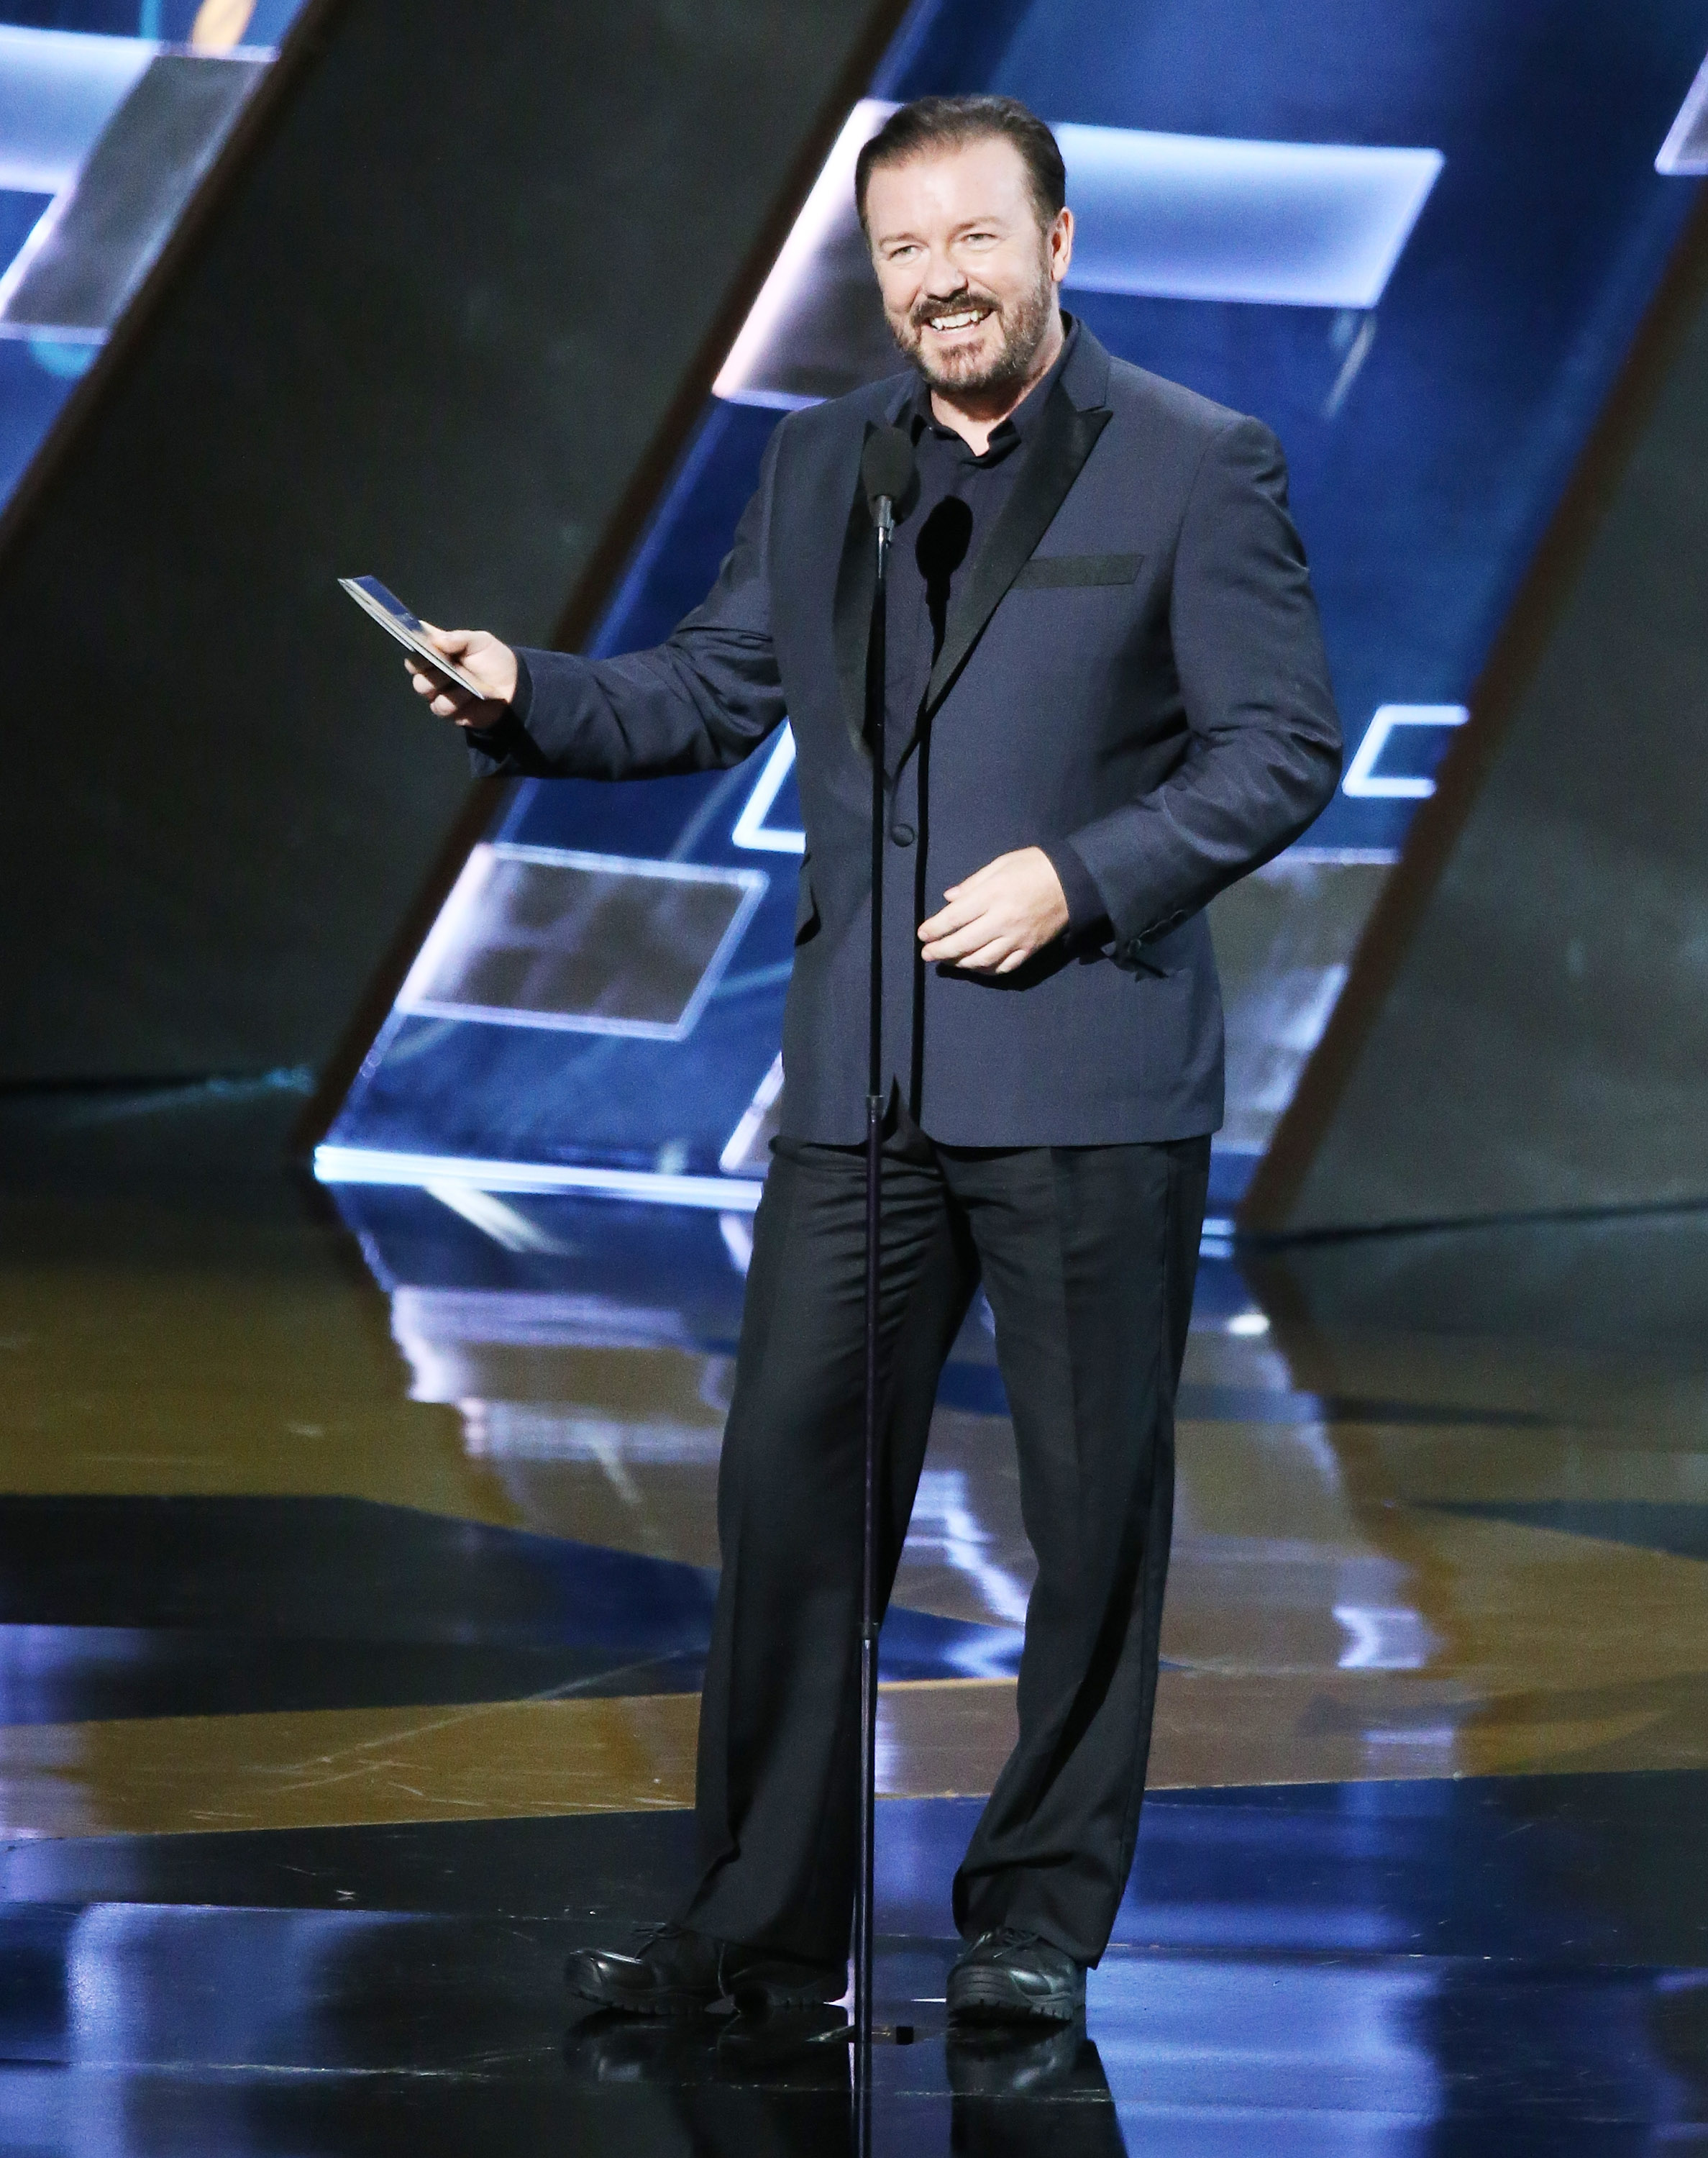 Ricky Gervais onstage during the 67th Annual Primetime Emmy Awards held at Microsoft Theater in Los Angeles, on on Sept. 20, 2015. (Michael Tran&mdash;FilmMagic/Getty Images)